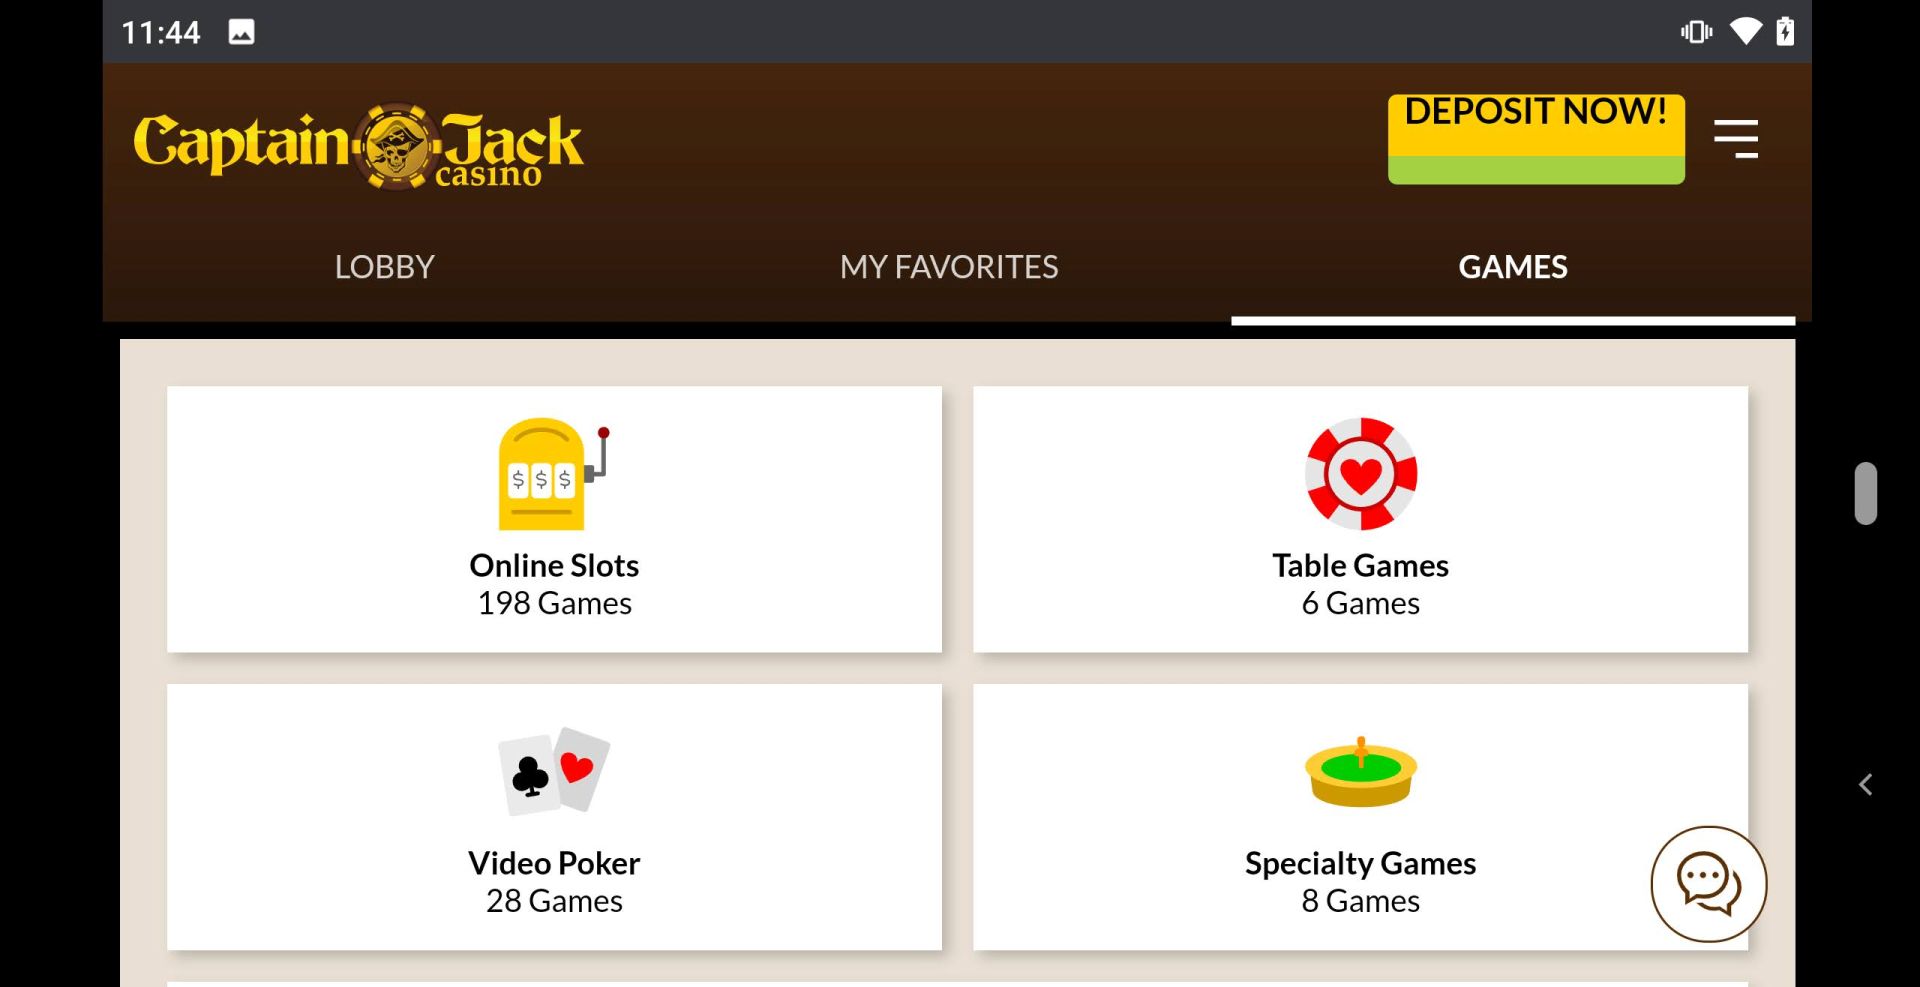 The Top 5 Table Games at Captain Jack Casino Online